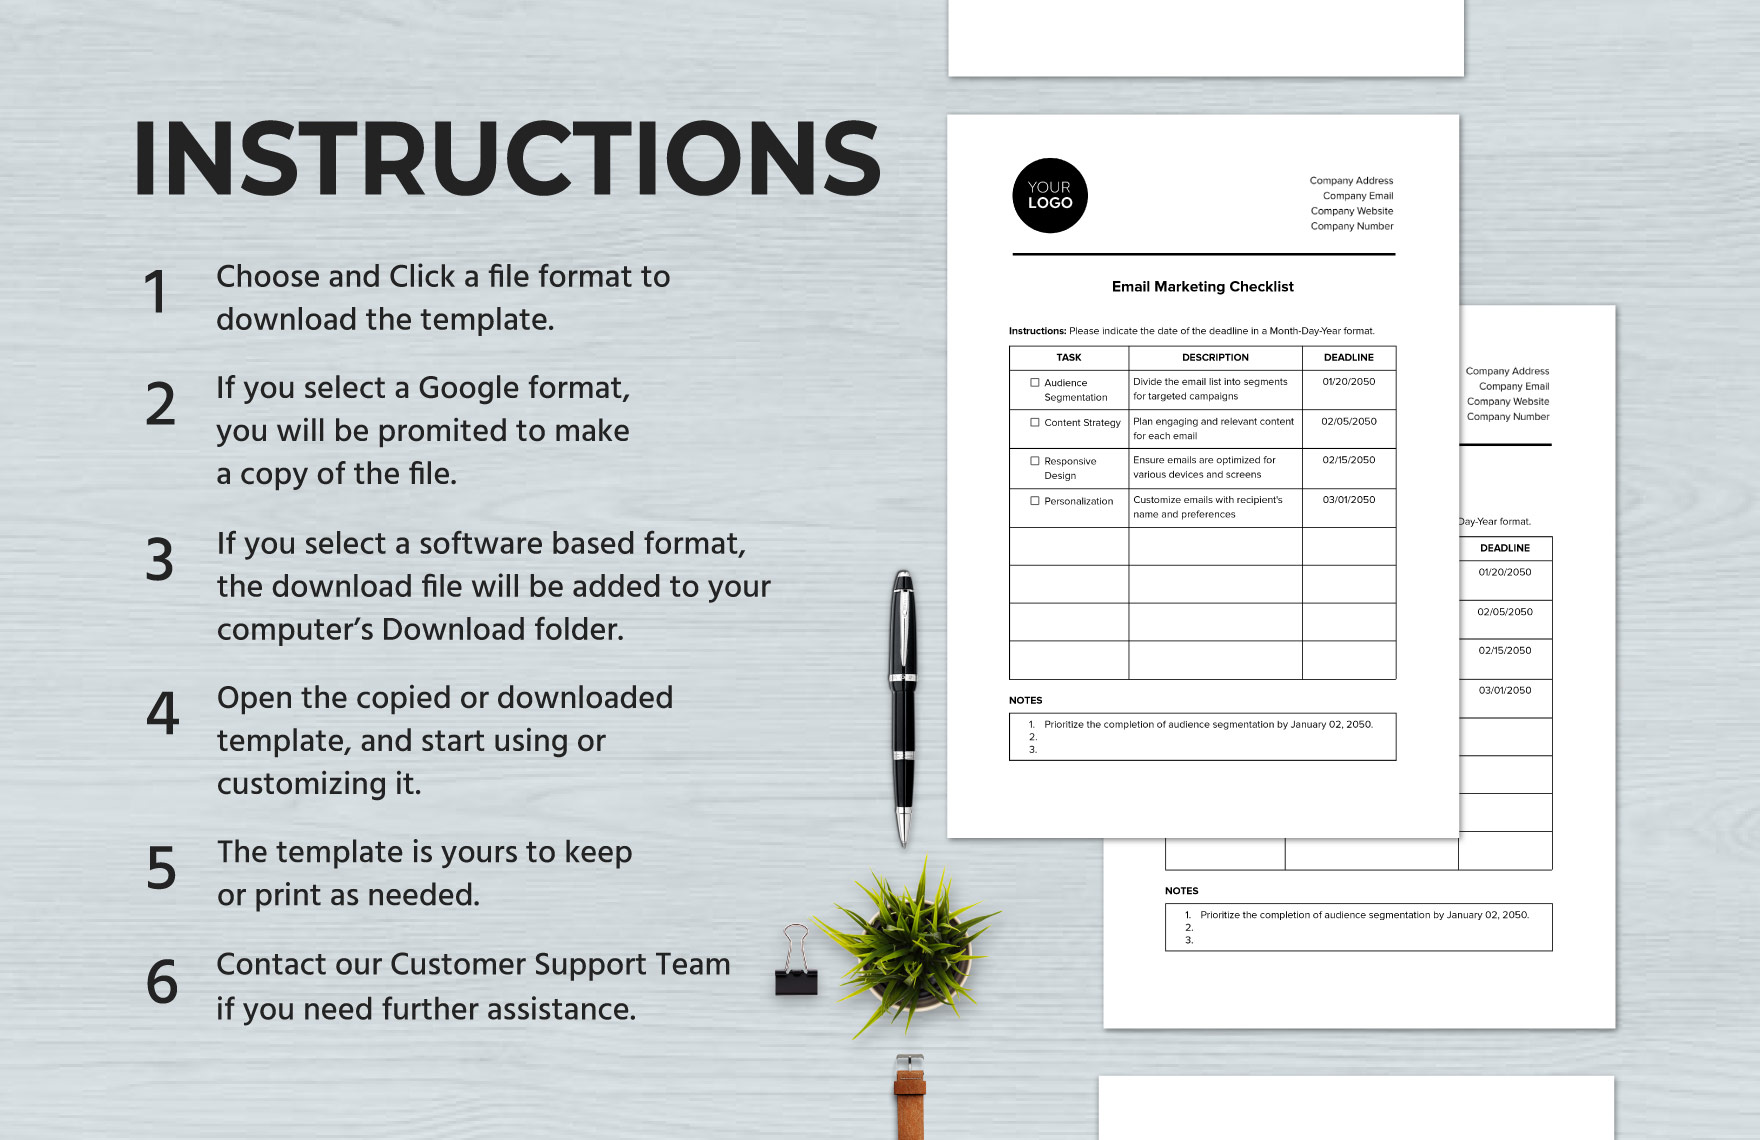 Email Marketing Checklist Template